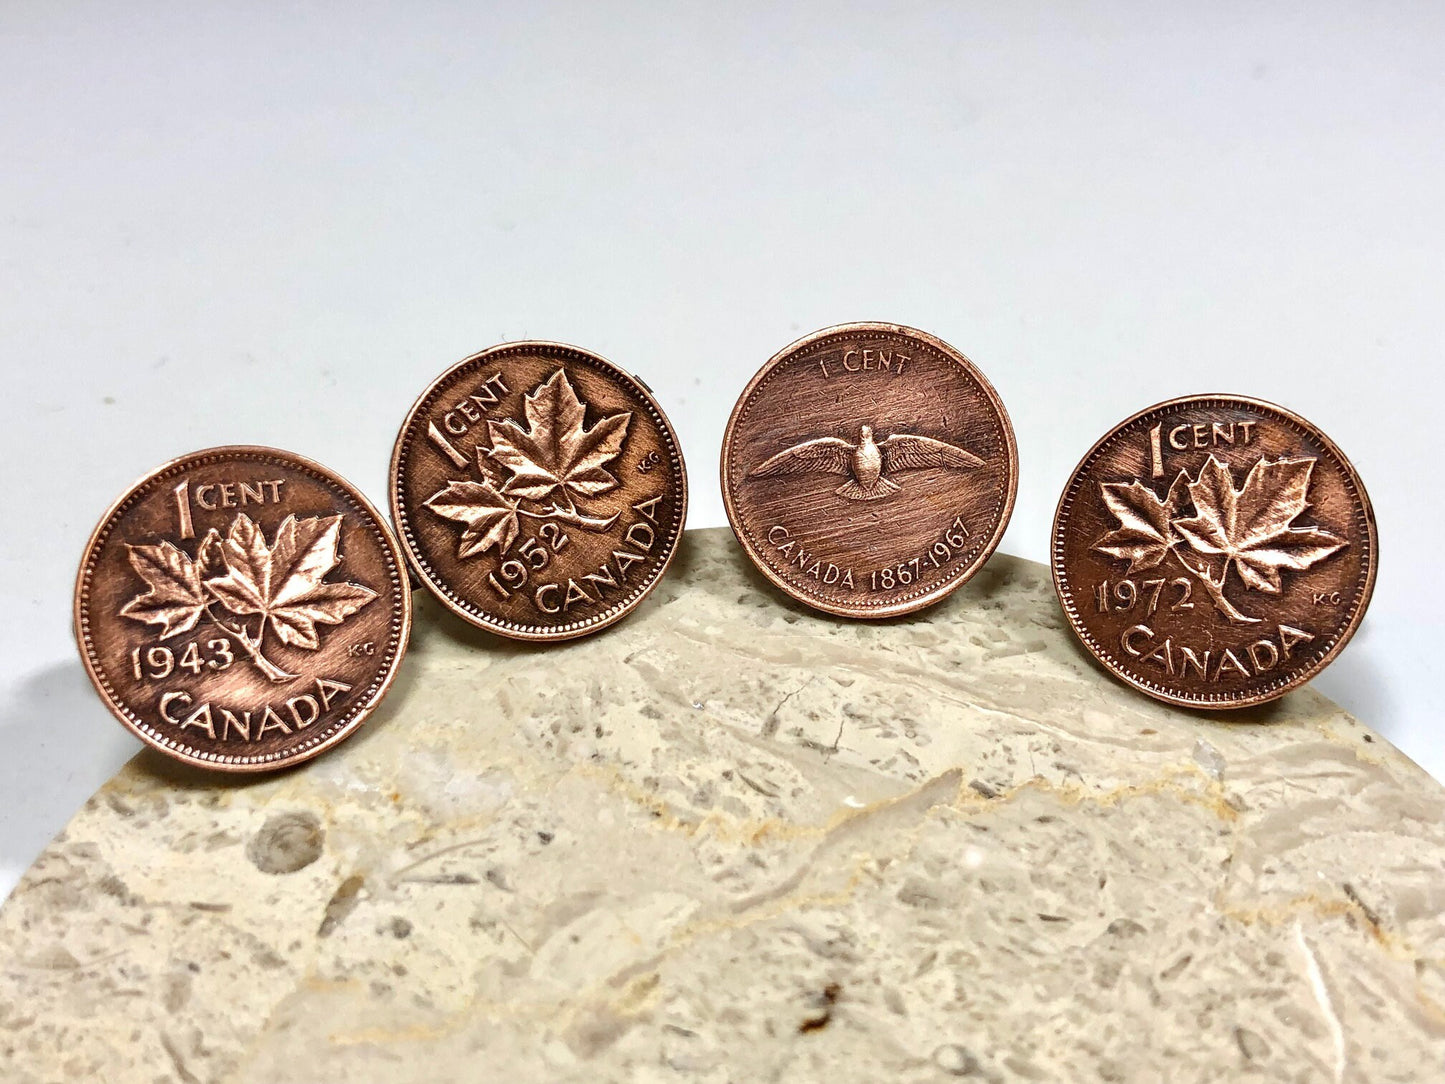 Canada Penny Coin Cuff Links Canada Cent Cufflinks Personal Vintage Handmade Jewelry Gift Friend Charm For Him Her World Coin Collector